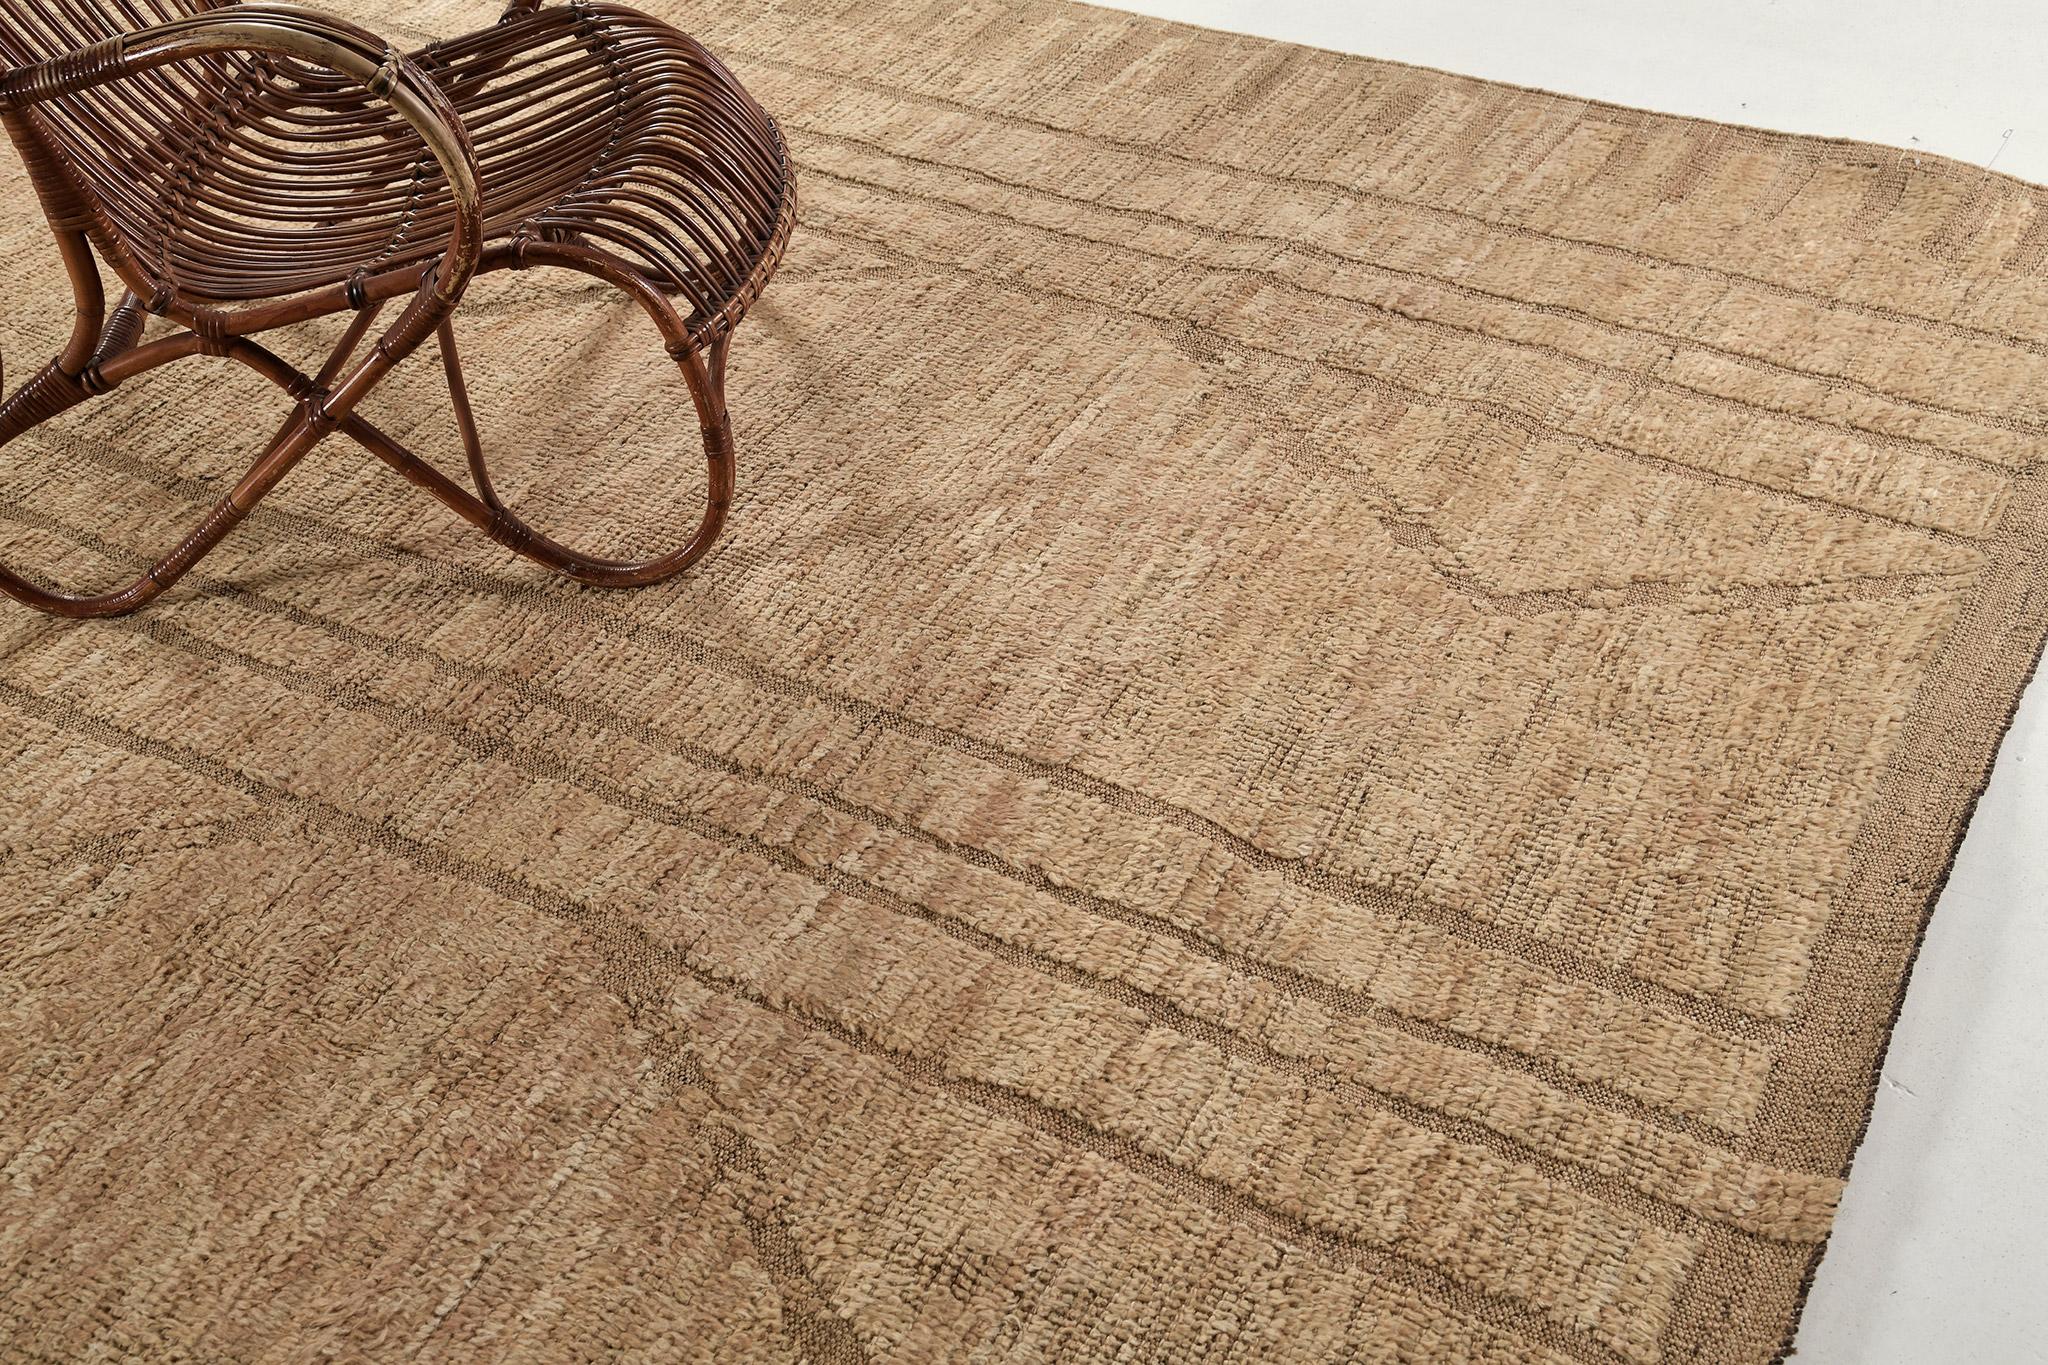 Zidan is an embossed pile weave that features neutral tones of linear patterns in luxurious wool. Perfect for a minimalist and modern contemporary interior. This masterpiece will be loved and adored by your guests.

Rug Number 30744
Size 10' 2